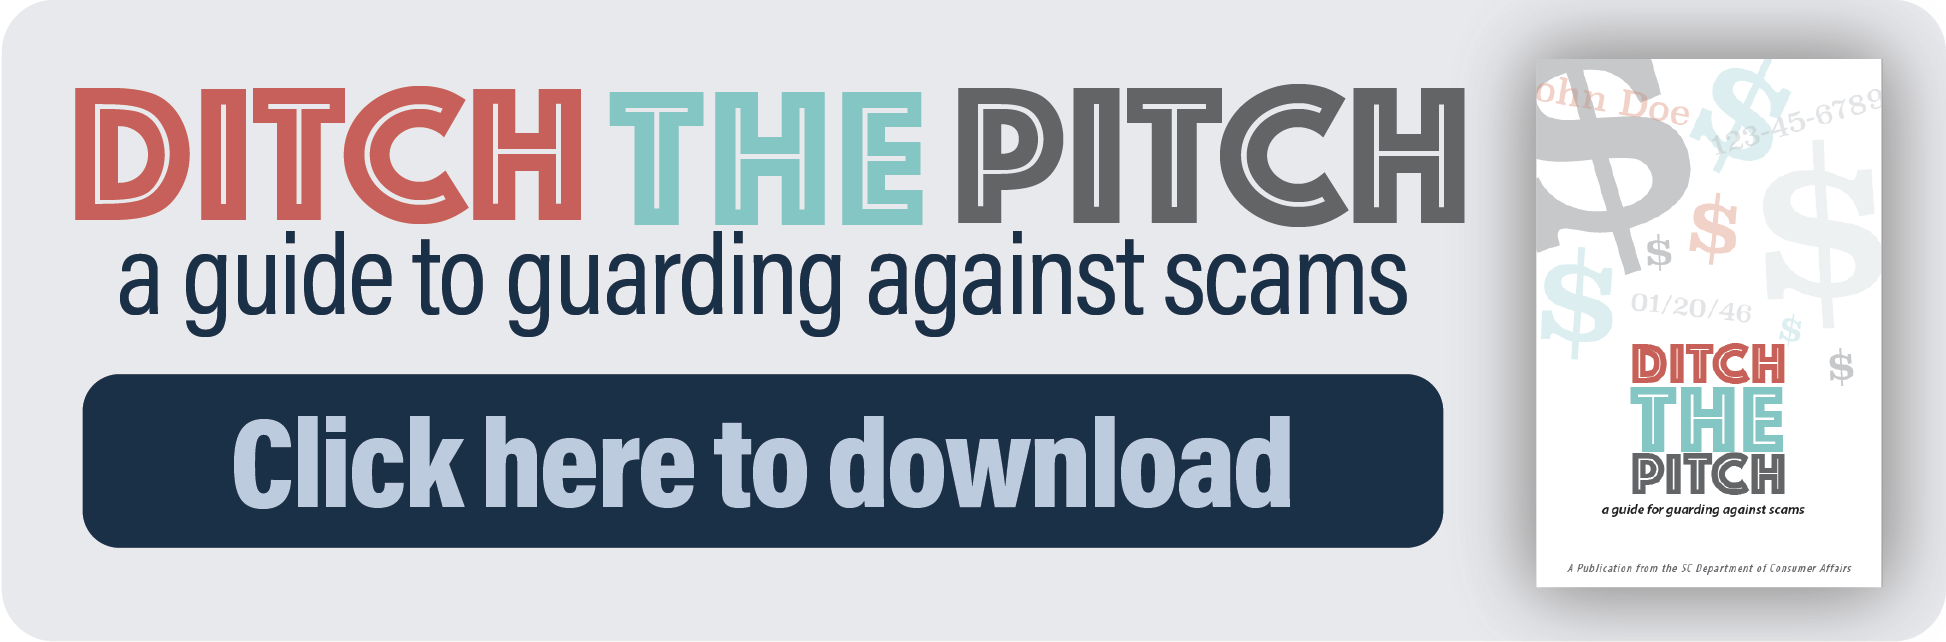 Click Here to Download Ditch the Pitch